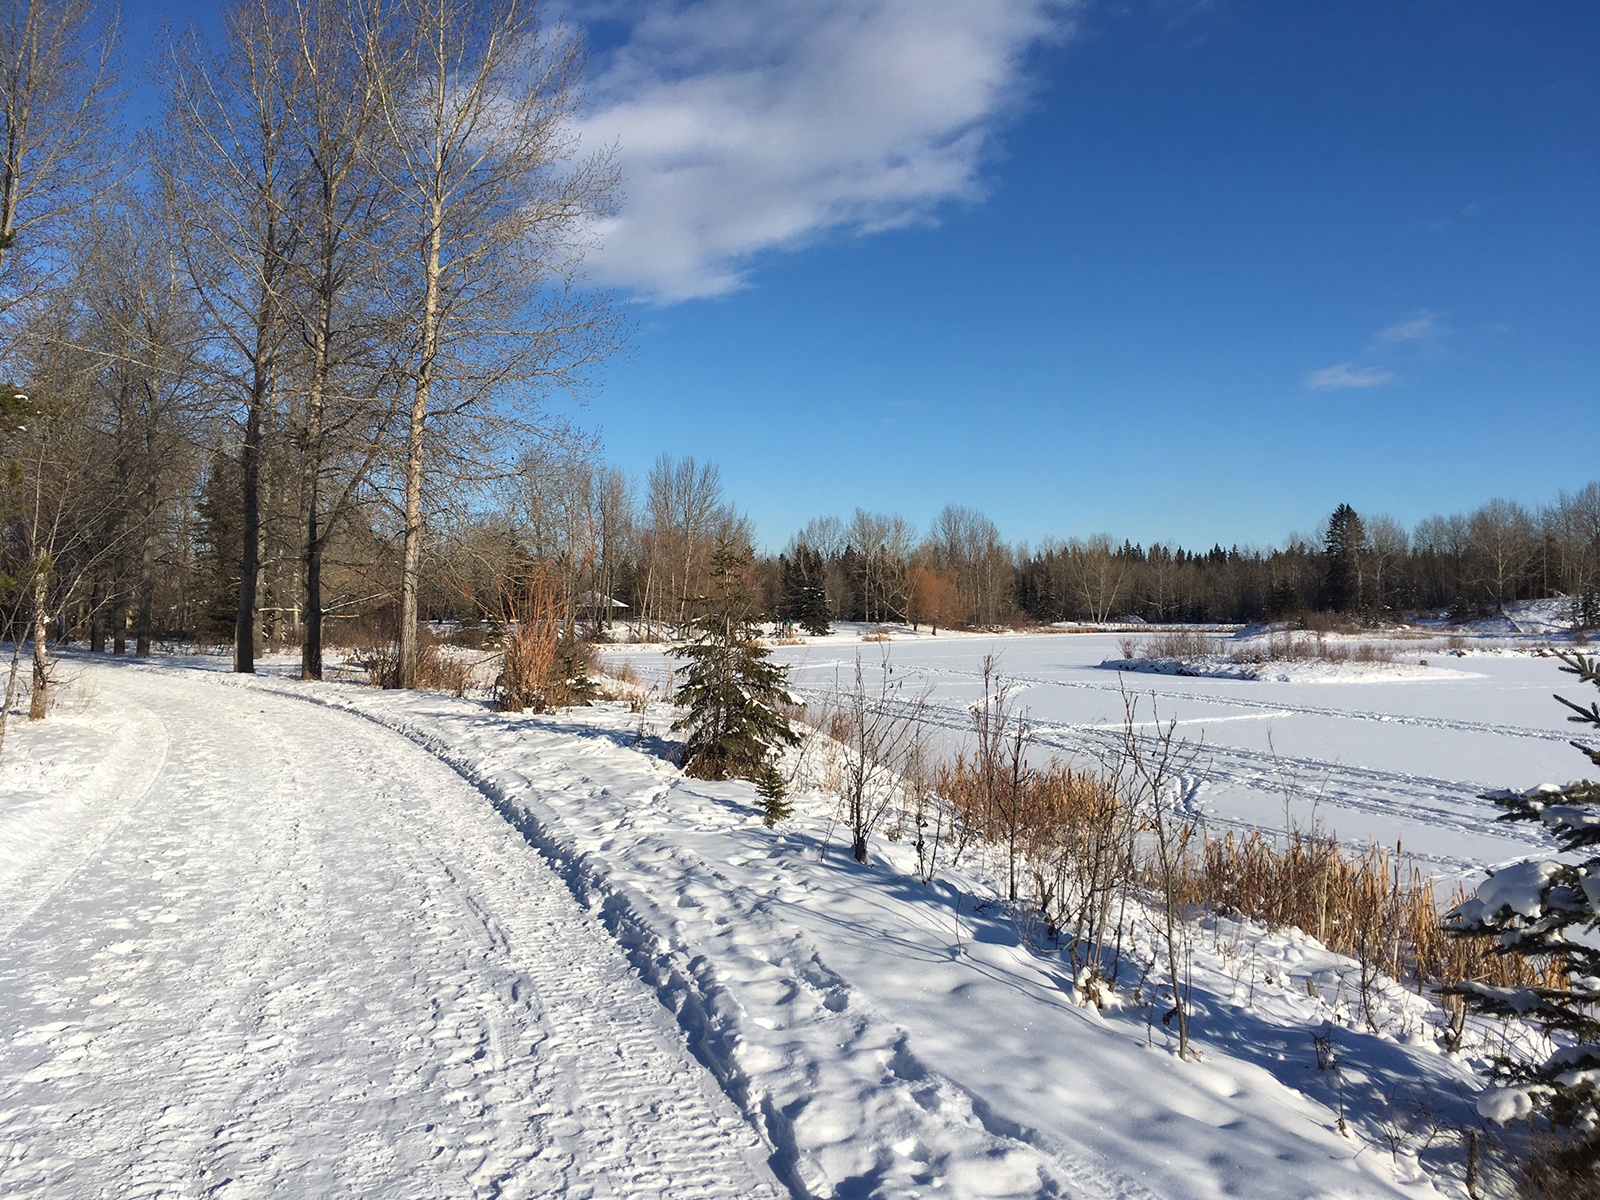 QUIET SCENE - McKenzie Trails is just one of many areas in the City that provides residents with a terrific spot to get some post-holiday exercise.